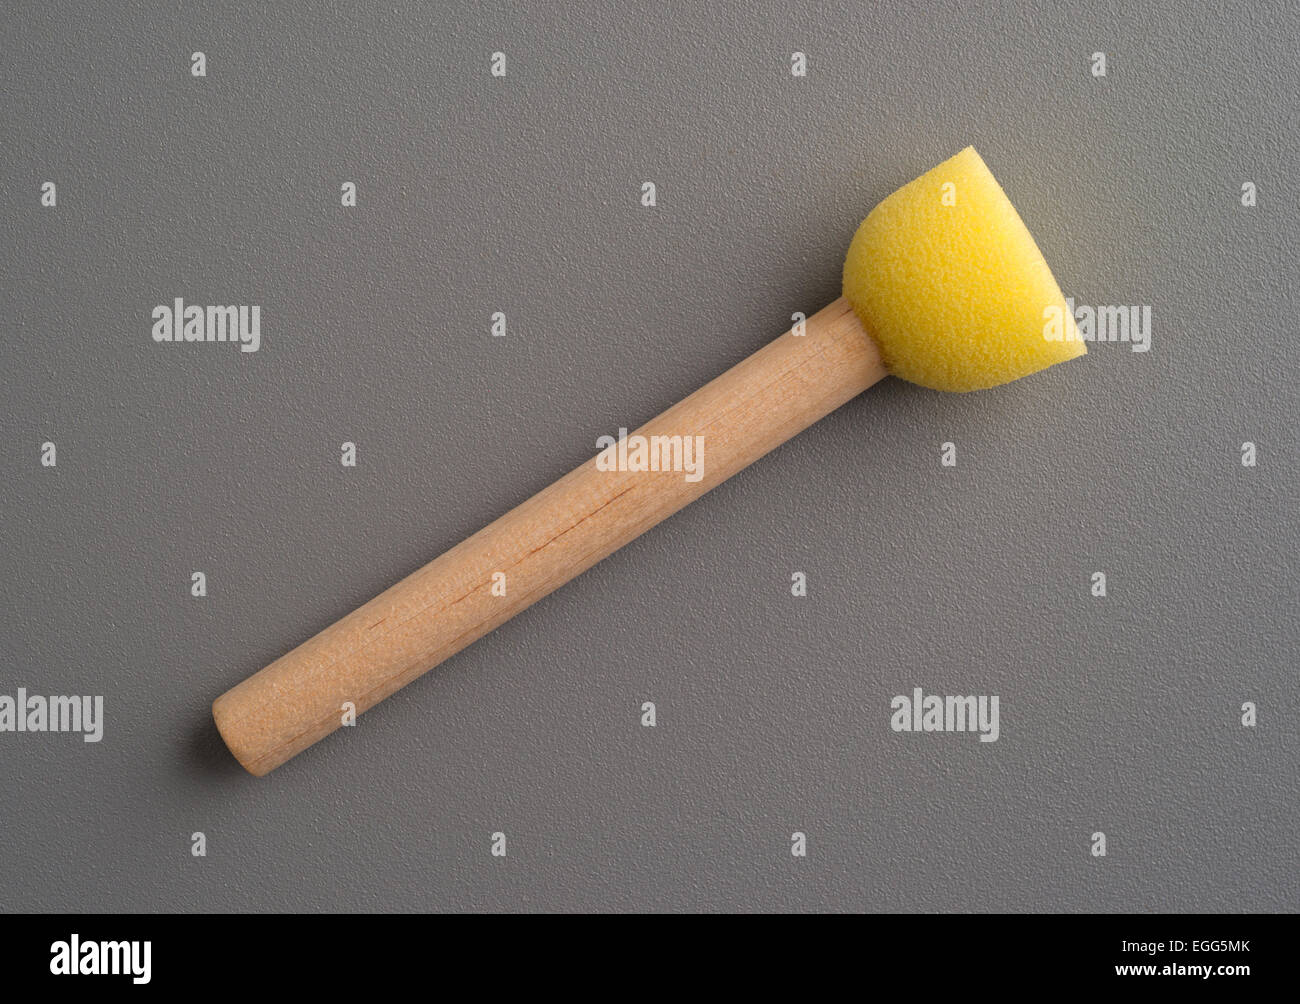 A small wood handle stencil brush on a gray background. Stock Photo